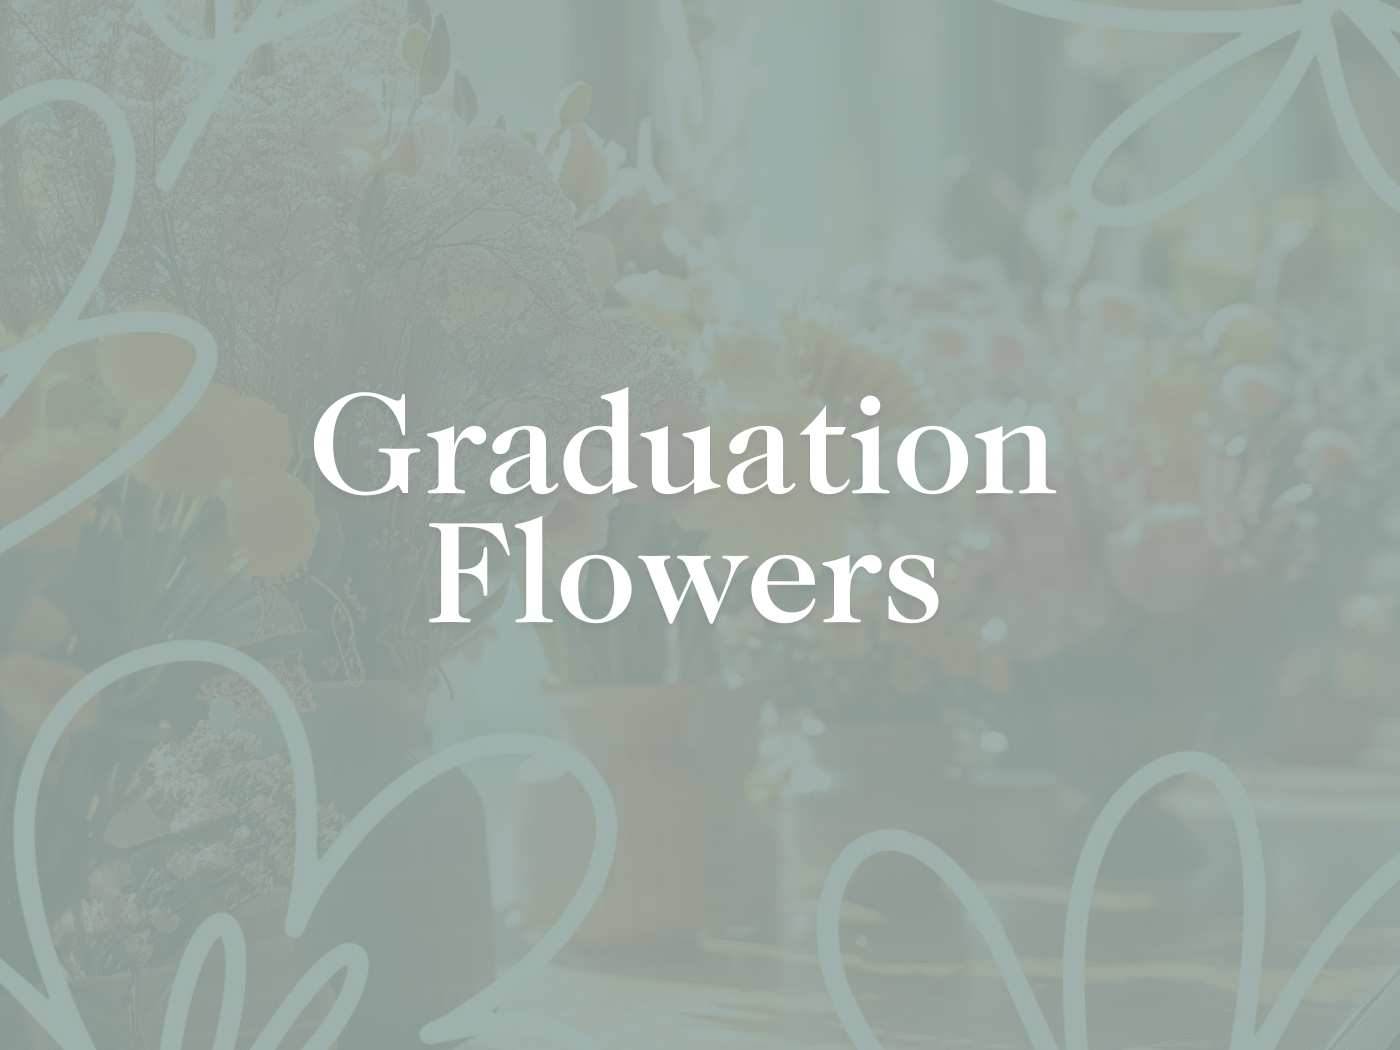 Elegant promotional image for graduation flowers featuring stylish floral arrangements and the text 'Graduation Flowers'. Graduation Flowers Delivered with Heart by Fabulous Flowers and Gifts.